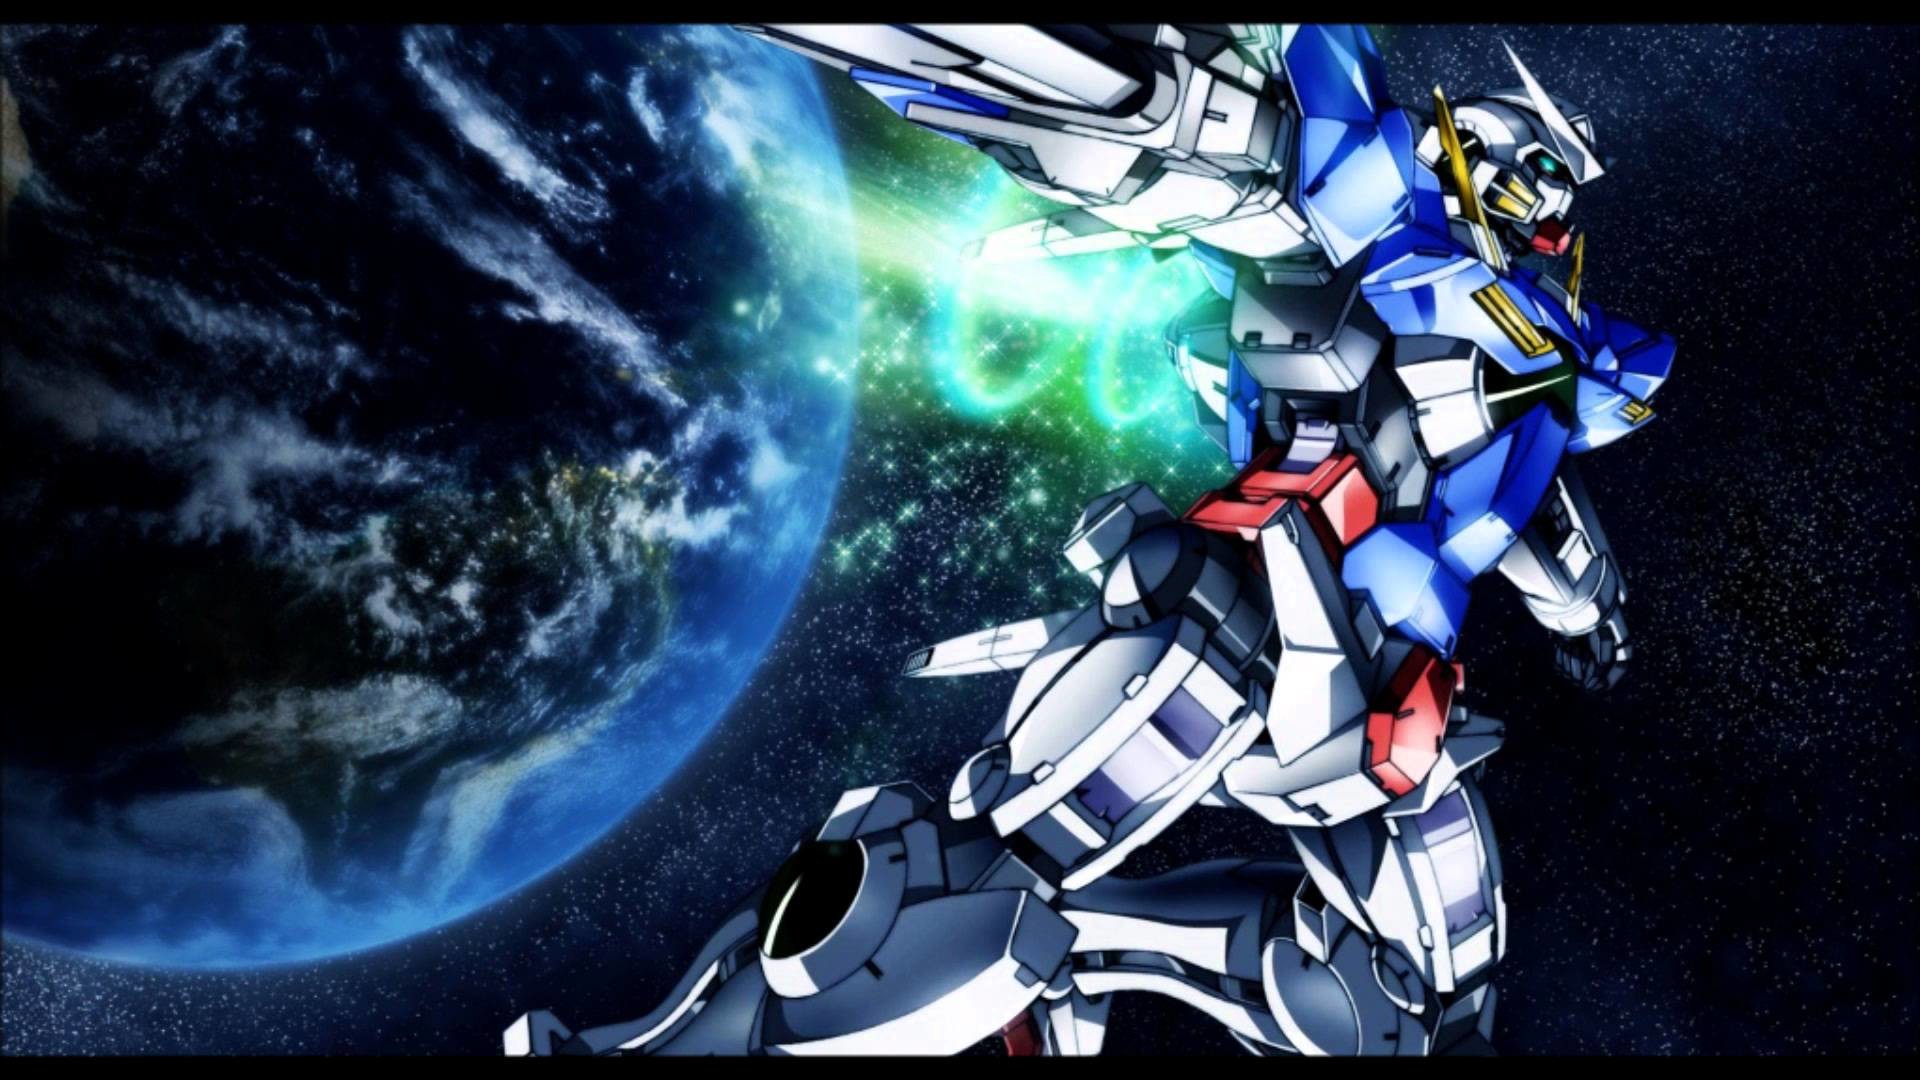 1920x1080 Just some gundam wallpapers I use